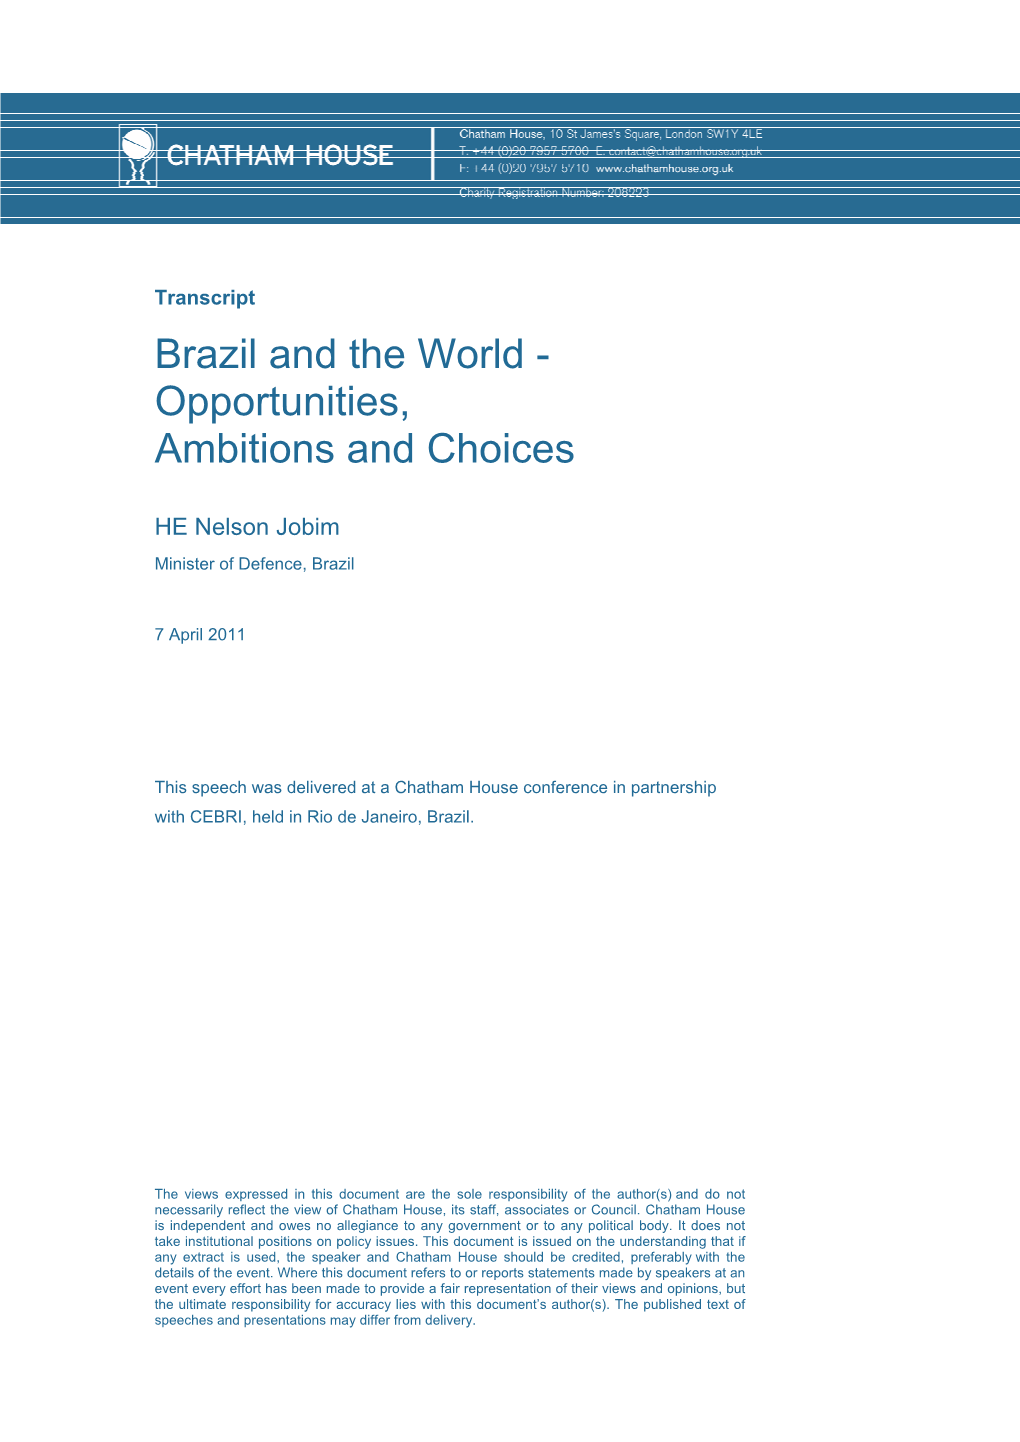 Brazil and the World - Opportunities, Ambitions and Choices